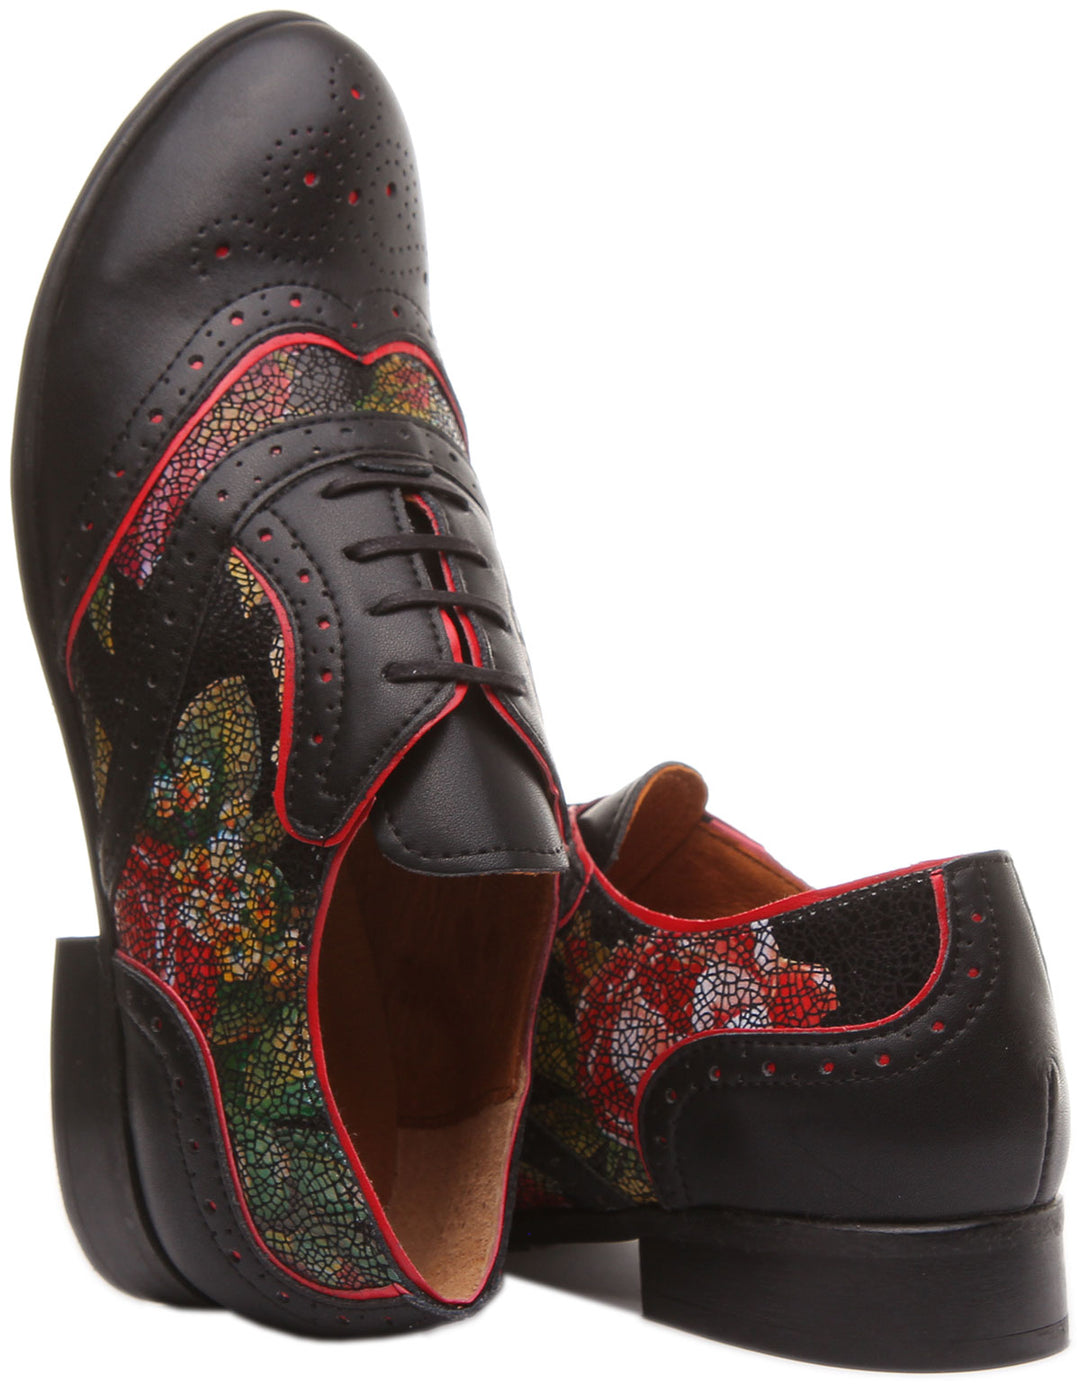 JUSTINREESS ENGLAND Womens Shoes Roxana Lace up Soft Leather Brogue Shoes in Black Flower Print